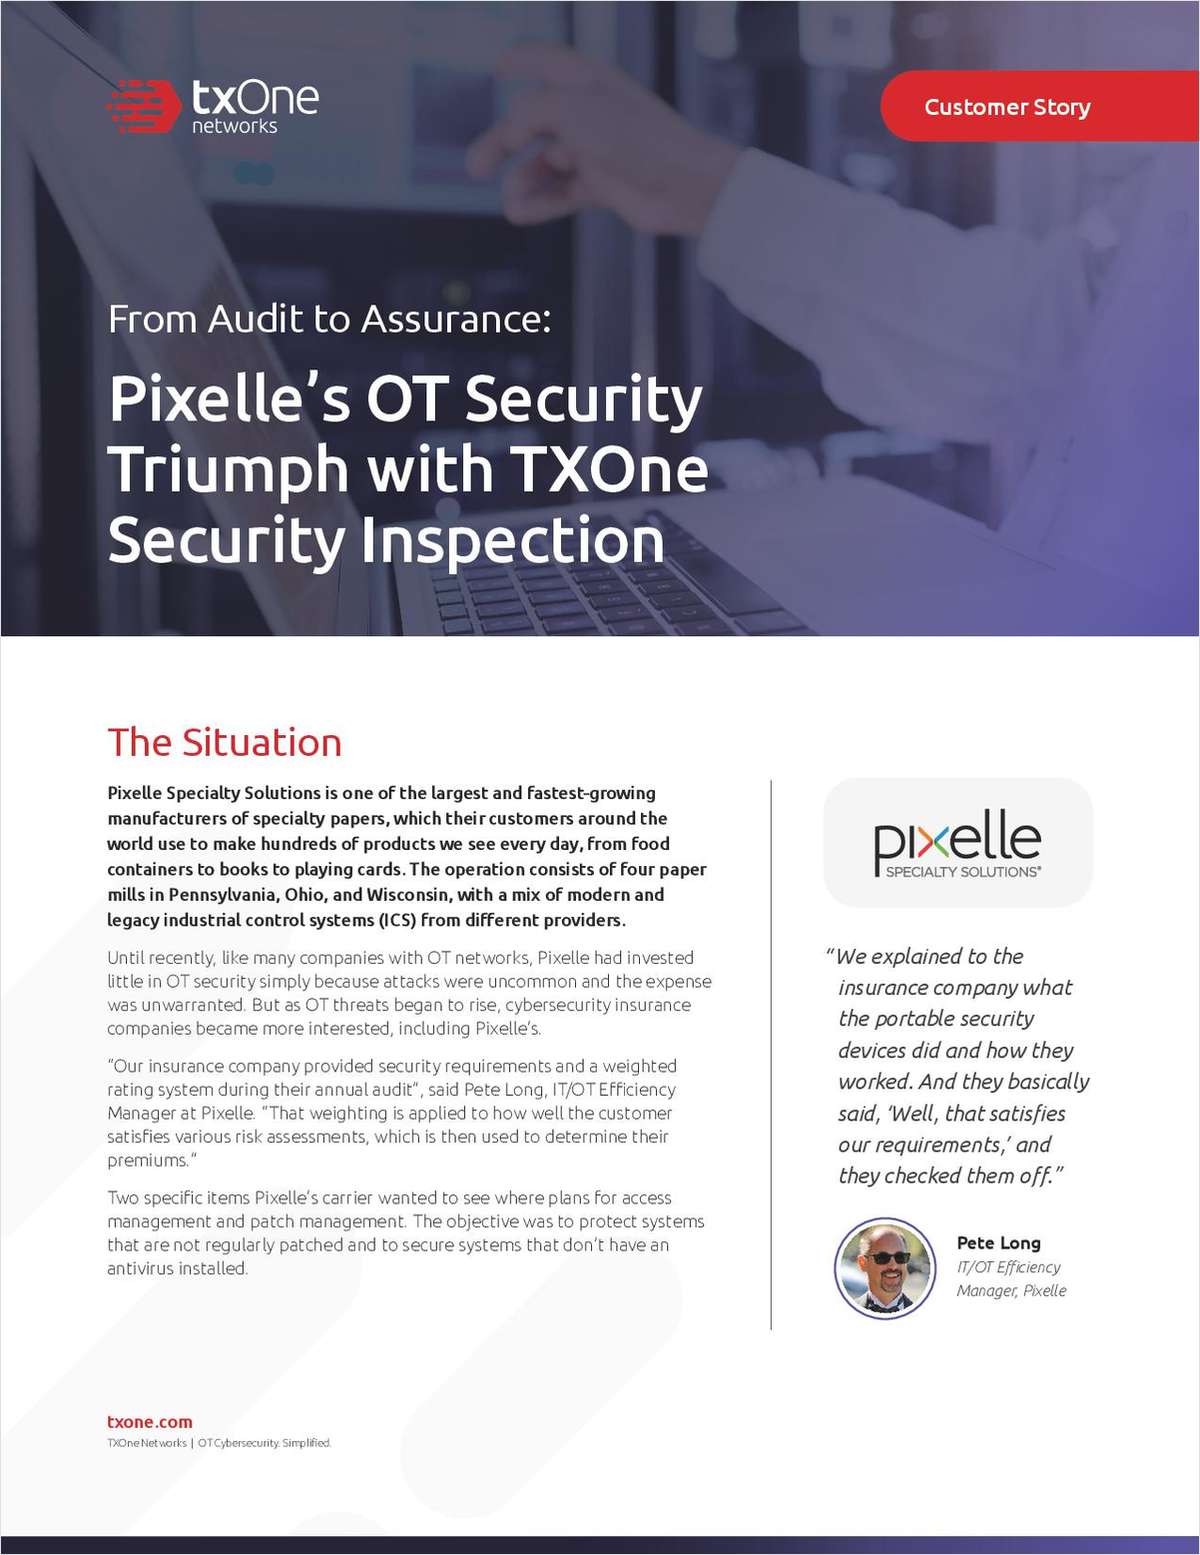 Pixelle's OT Security Triumph with Security Inspection